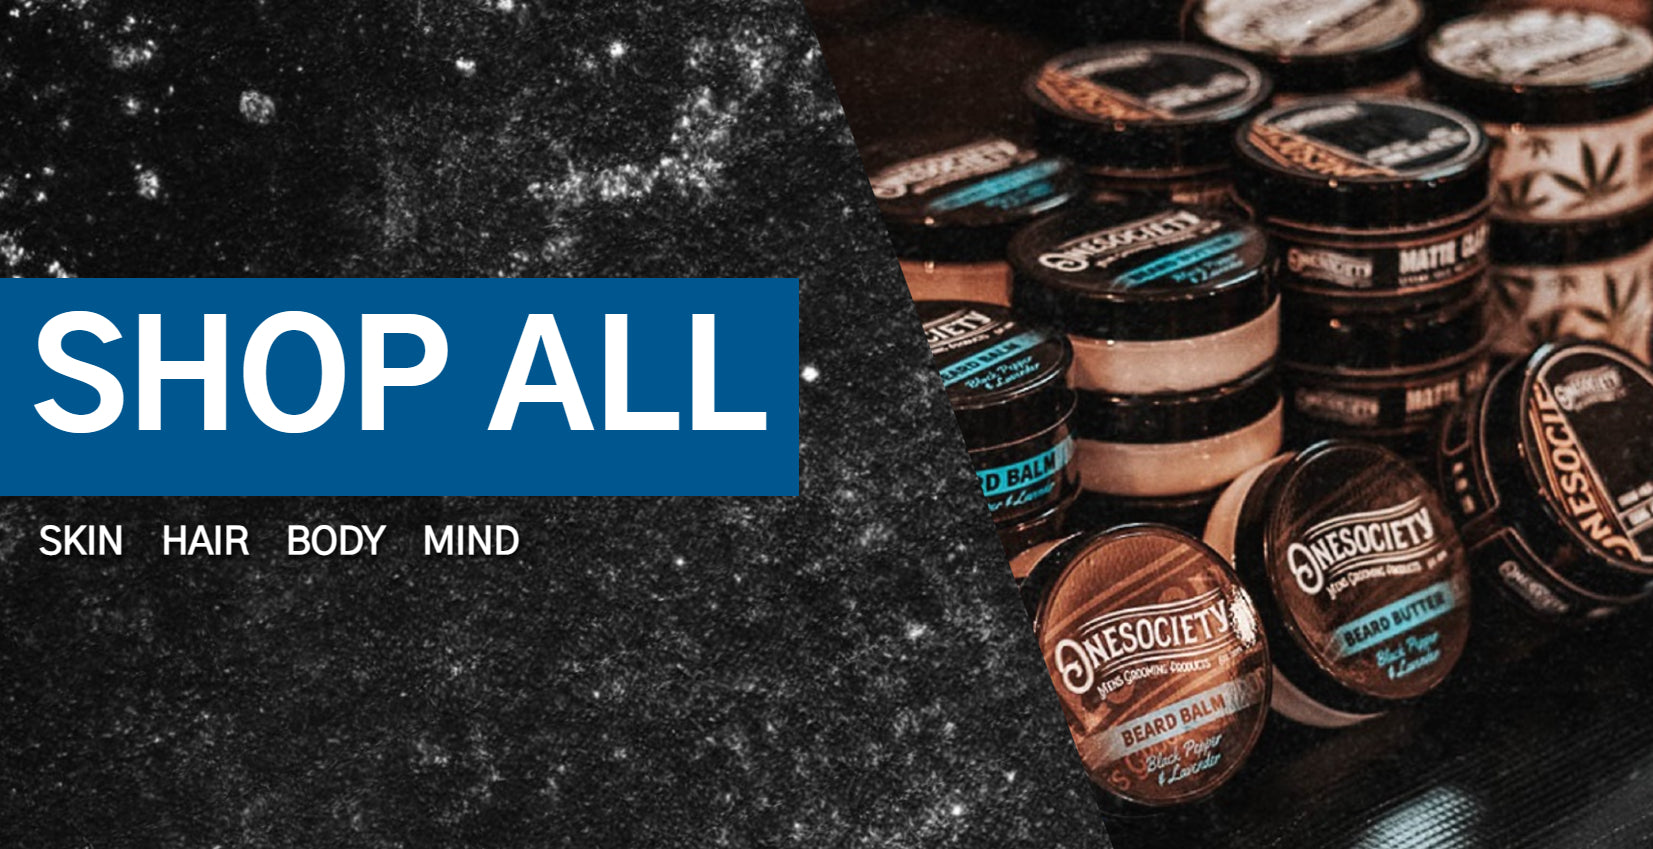 Shop all One Society Men's Grooming Products. Skin hair body and Mind. Onesociety Beard care made in the UK.